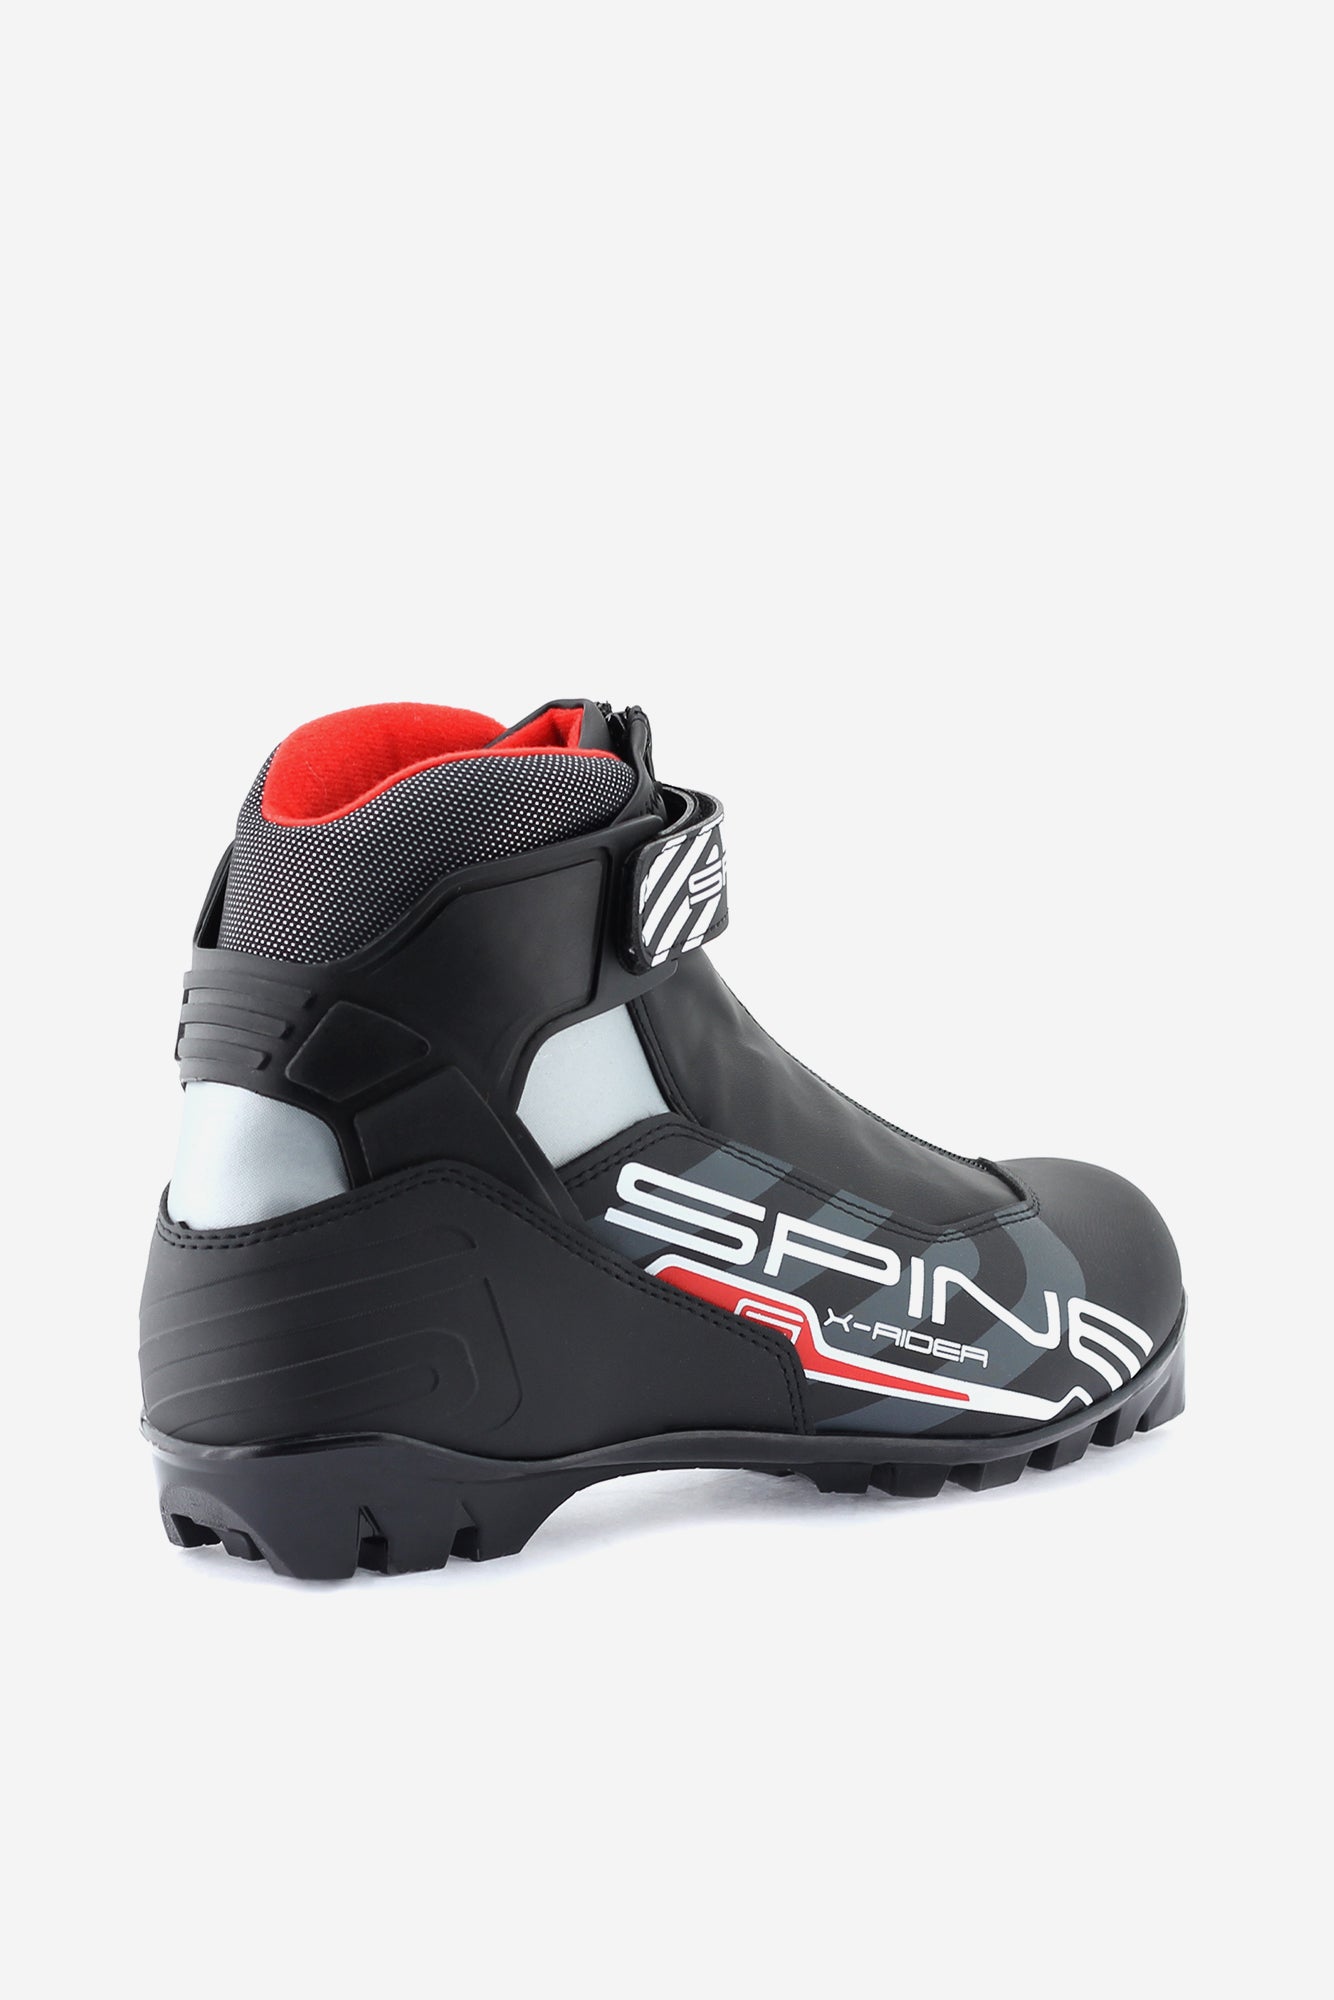 Spine X-Rider Cross-Country Ski Boots